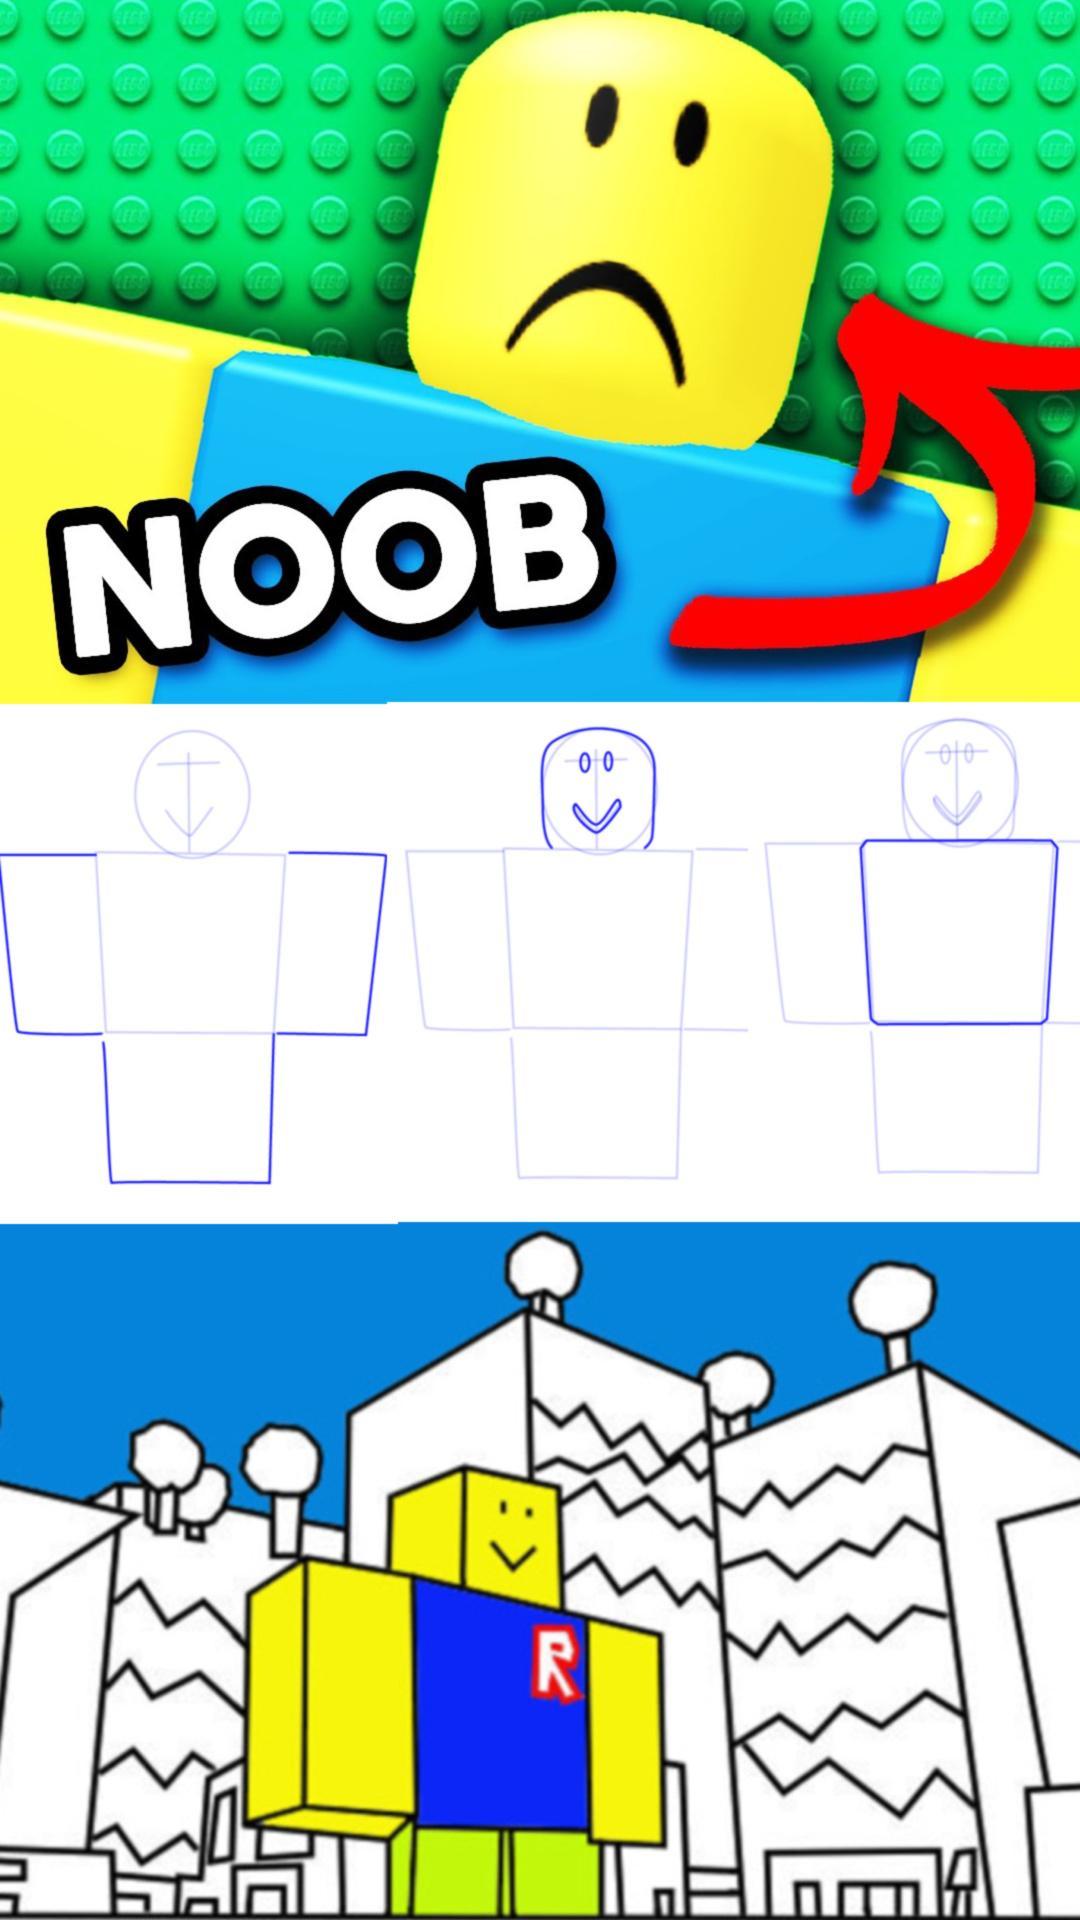 How To Draw Roblox For Android Apk Download - roblox noob drawing